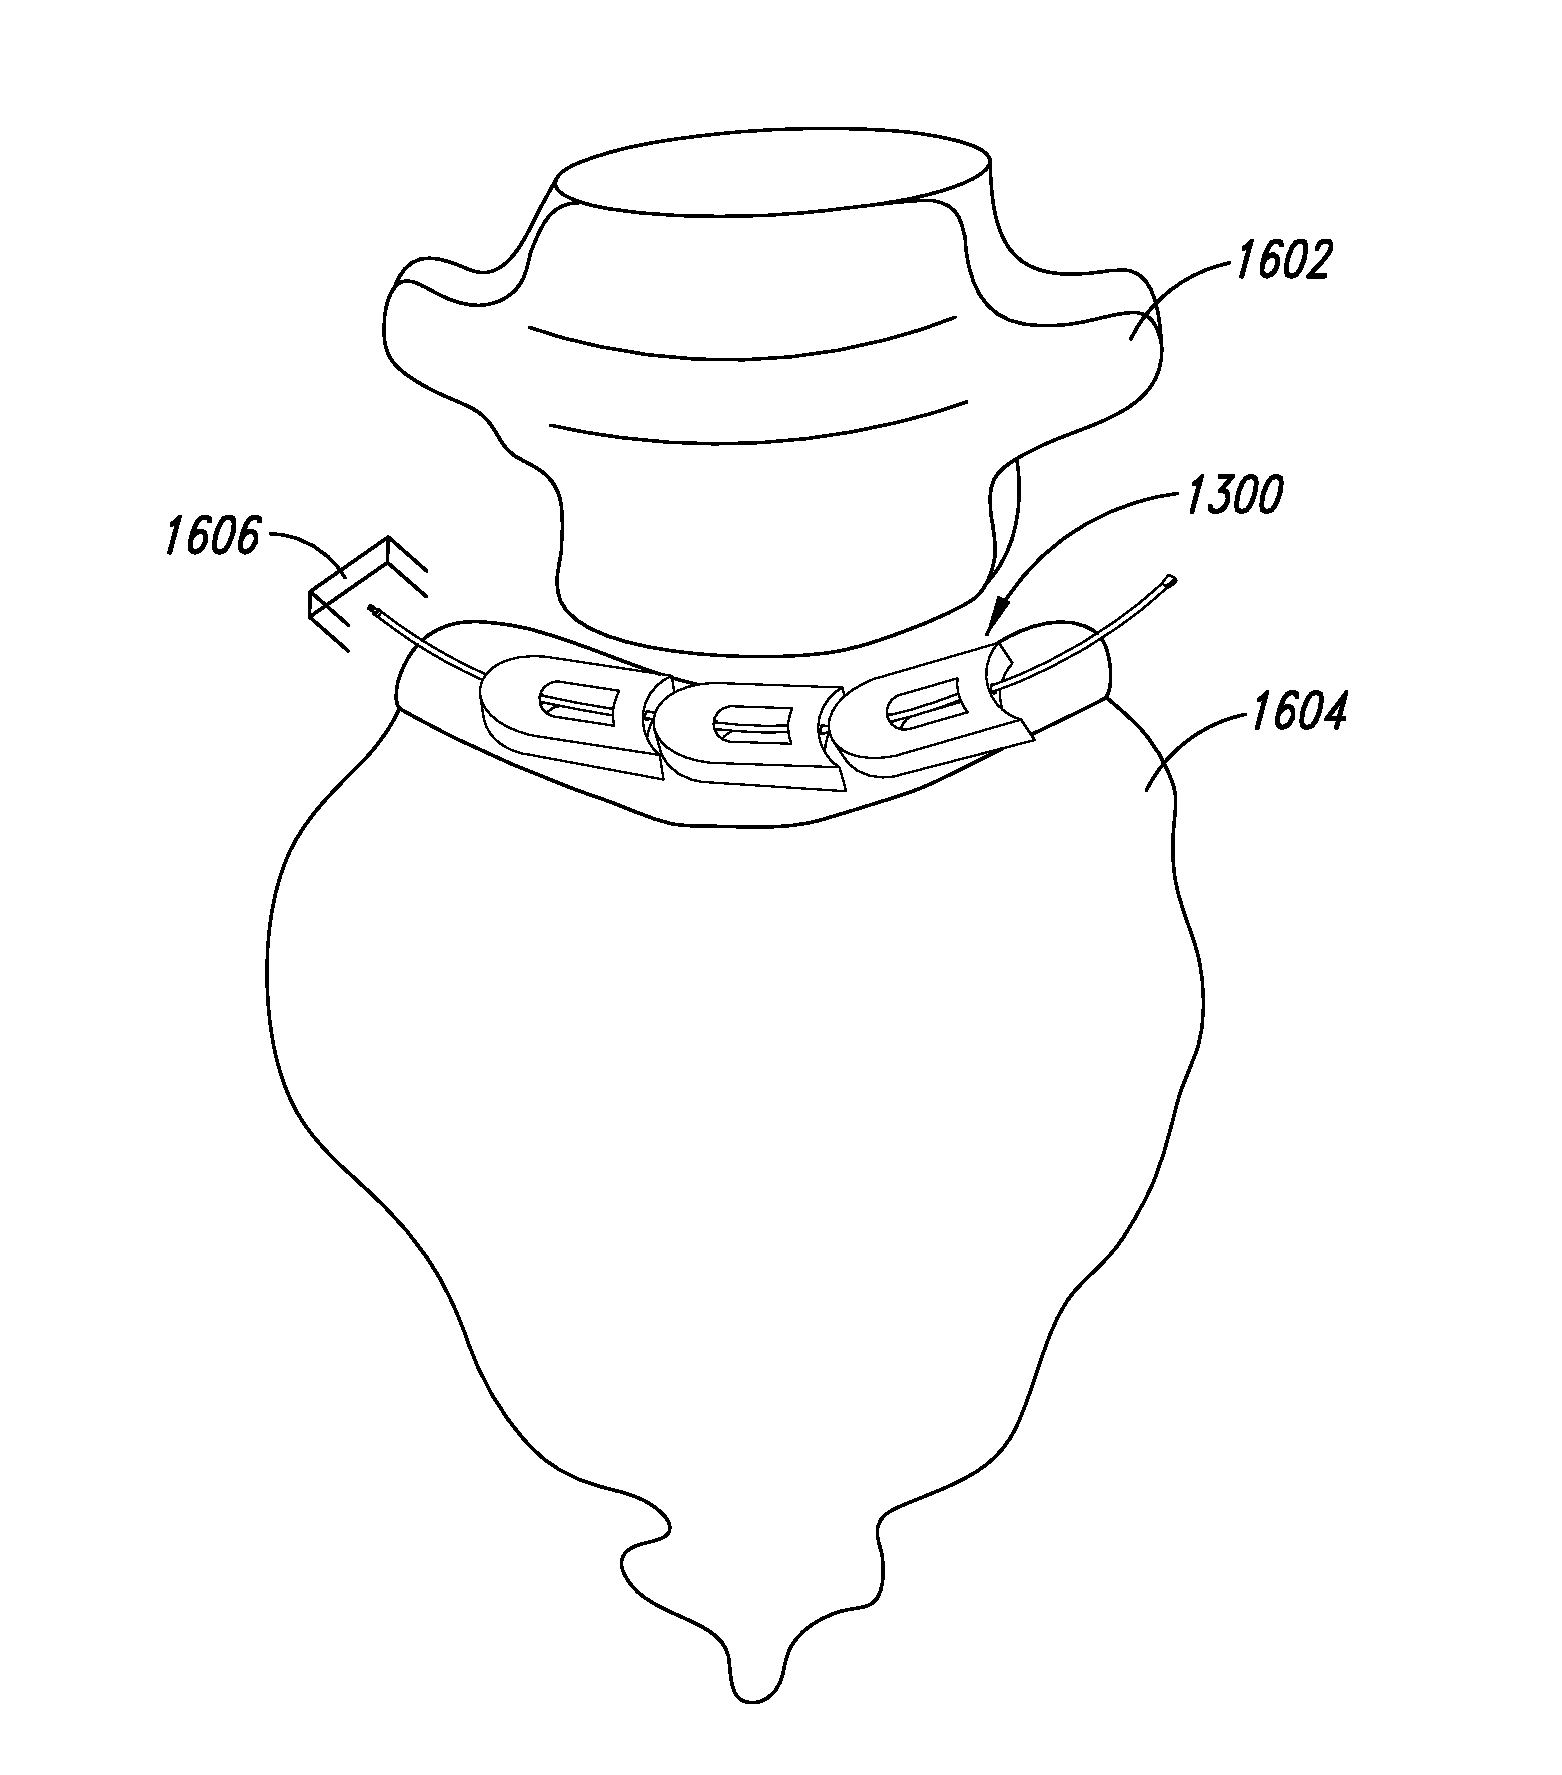 Devices and approach for prone intervertebral implant